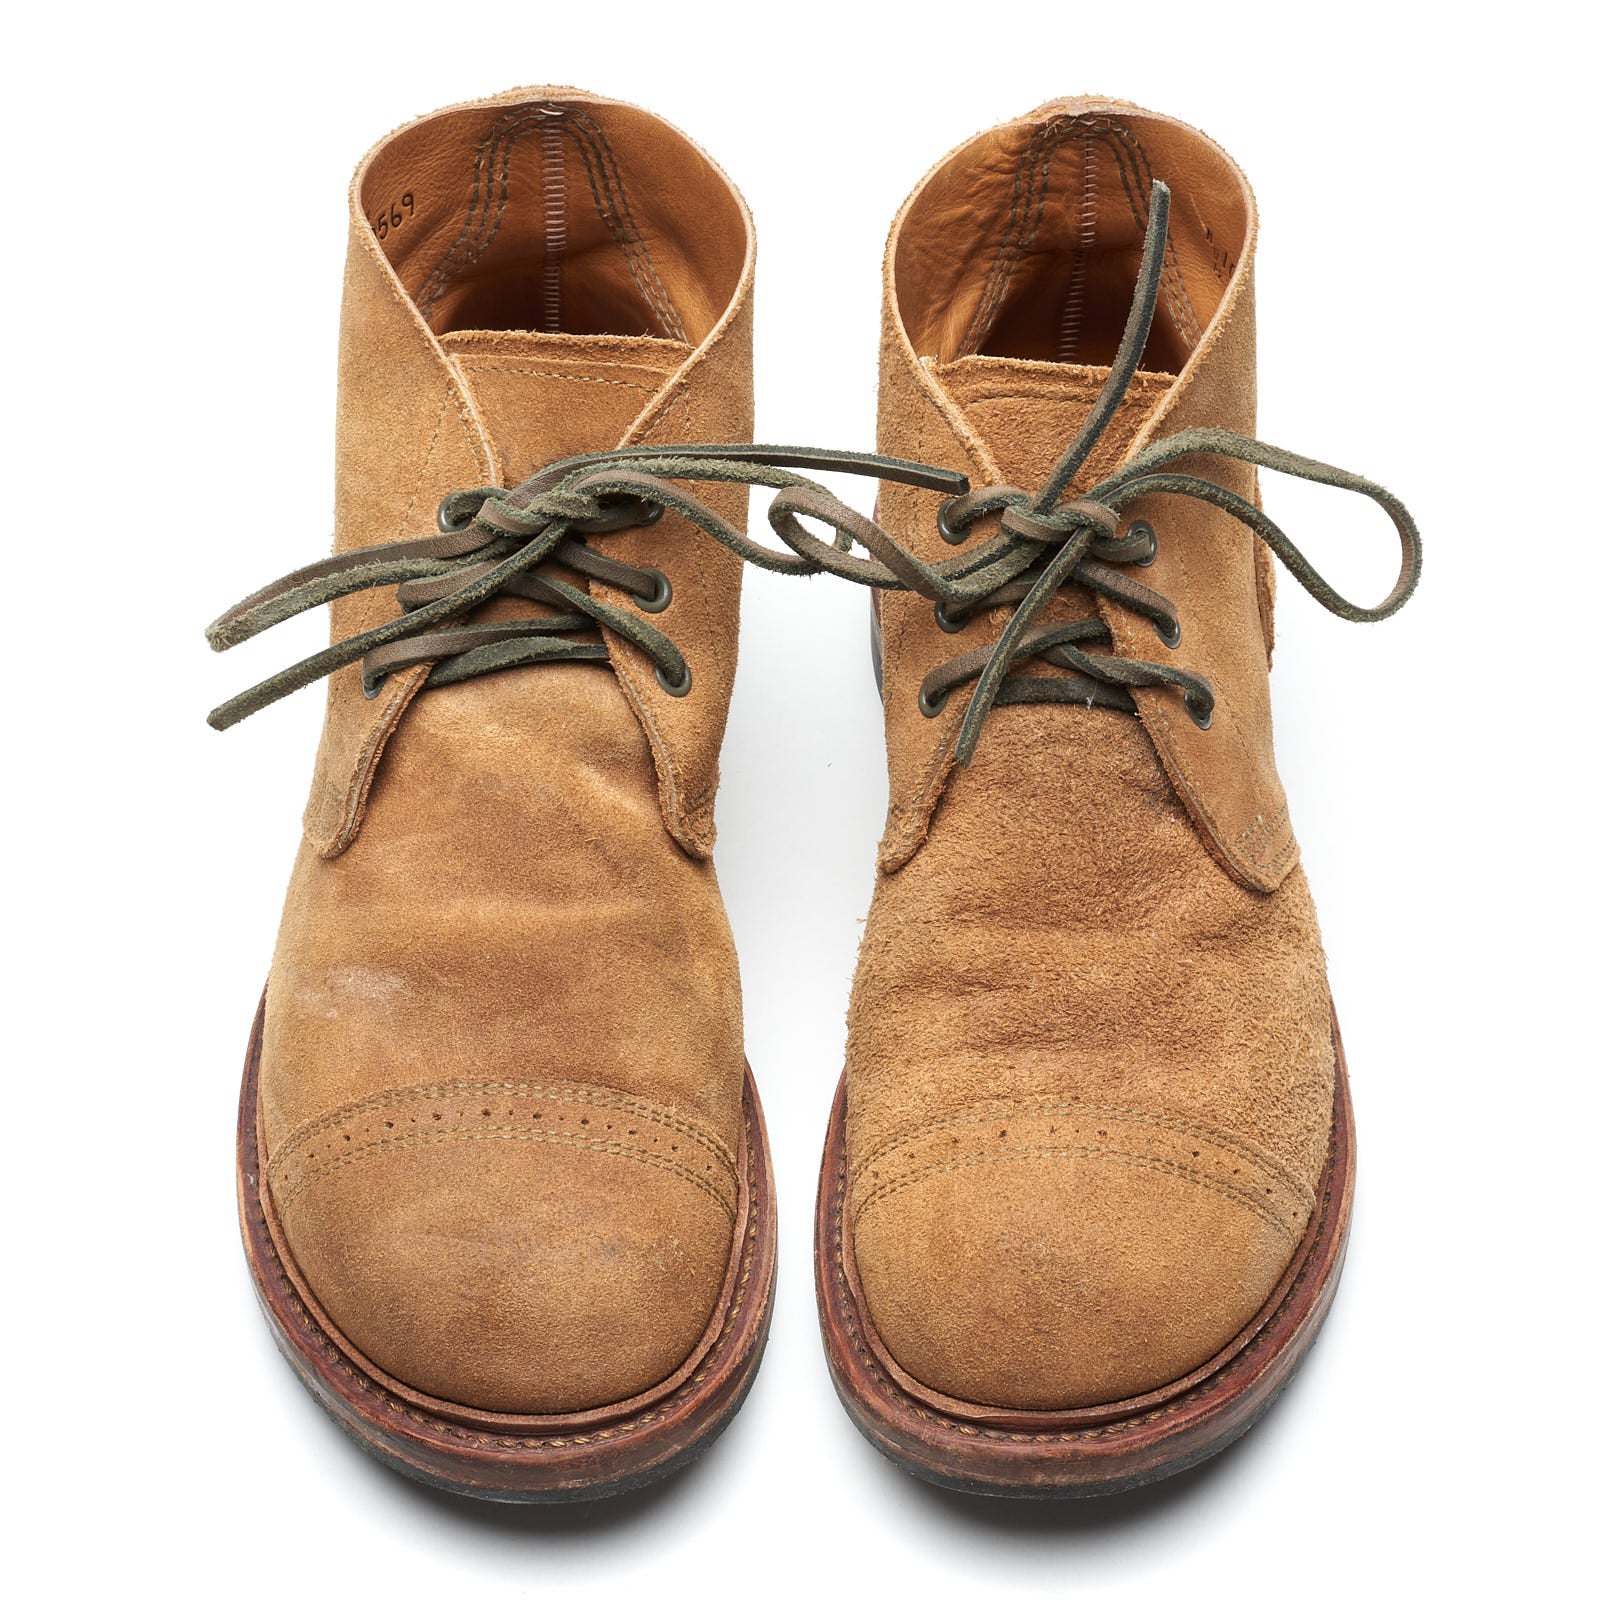 RED WING X NIGEL CABOURN 4632 Heritage Chukka Boots US 10 D Munson Lim